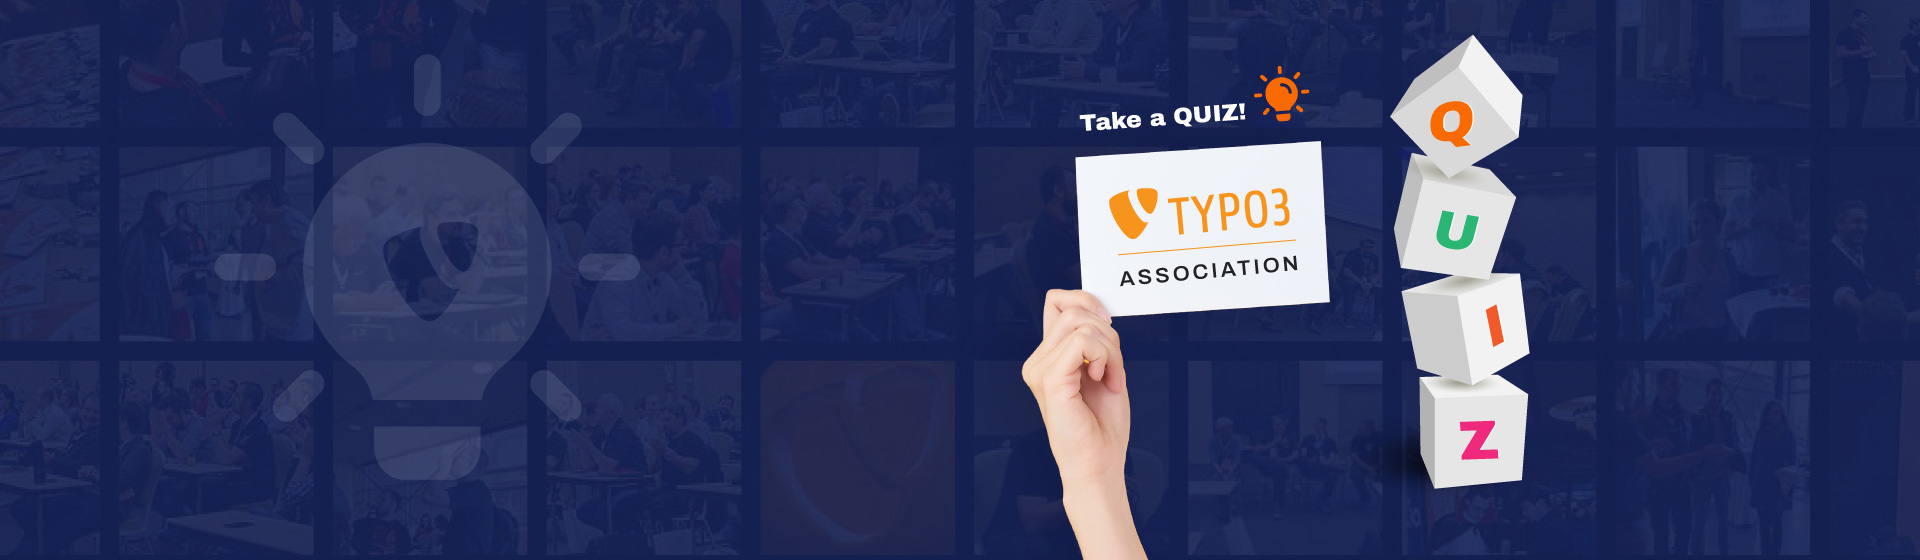 How Well Do You Know About TYPO3 Association?